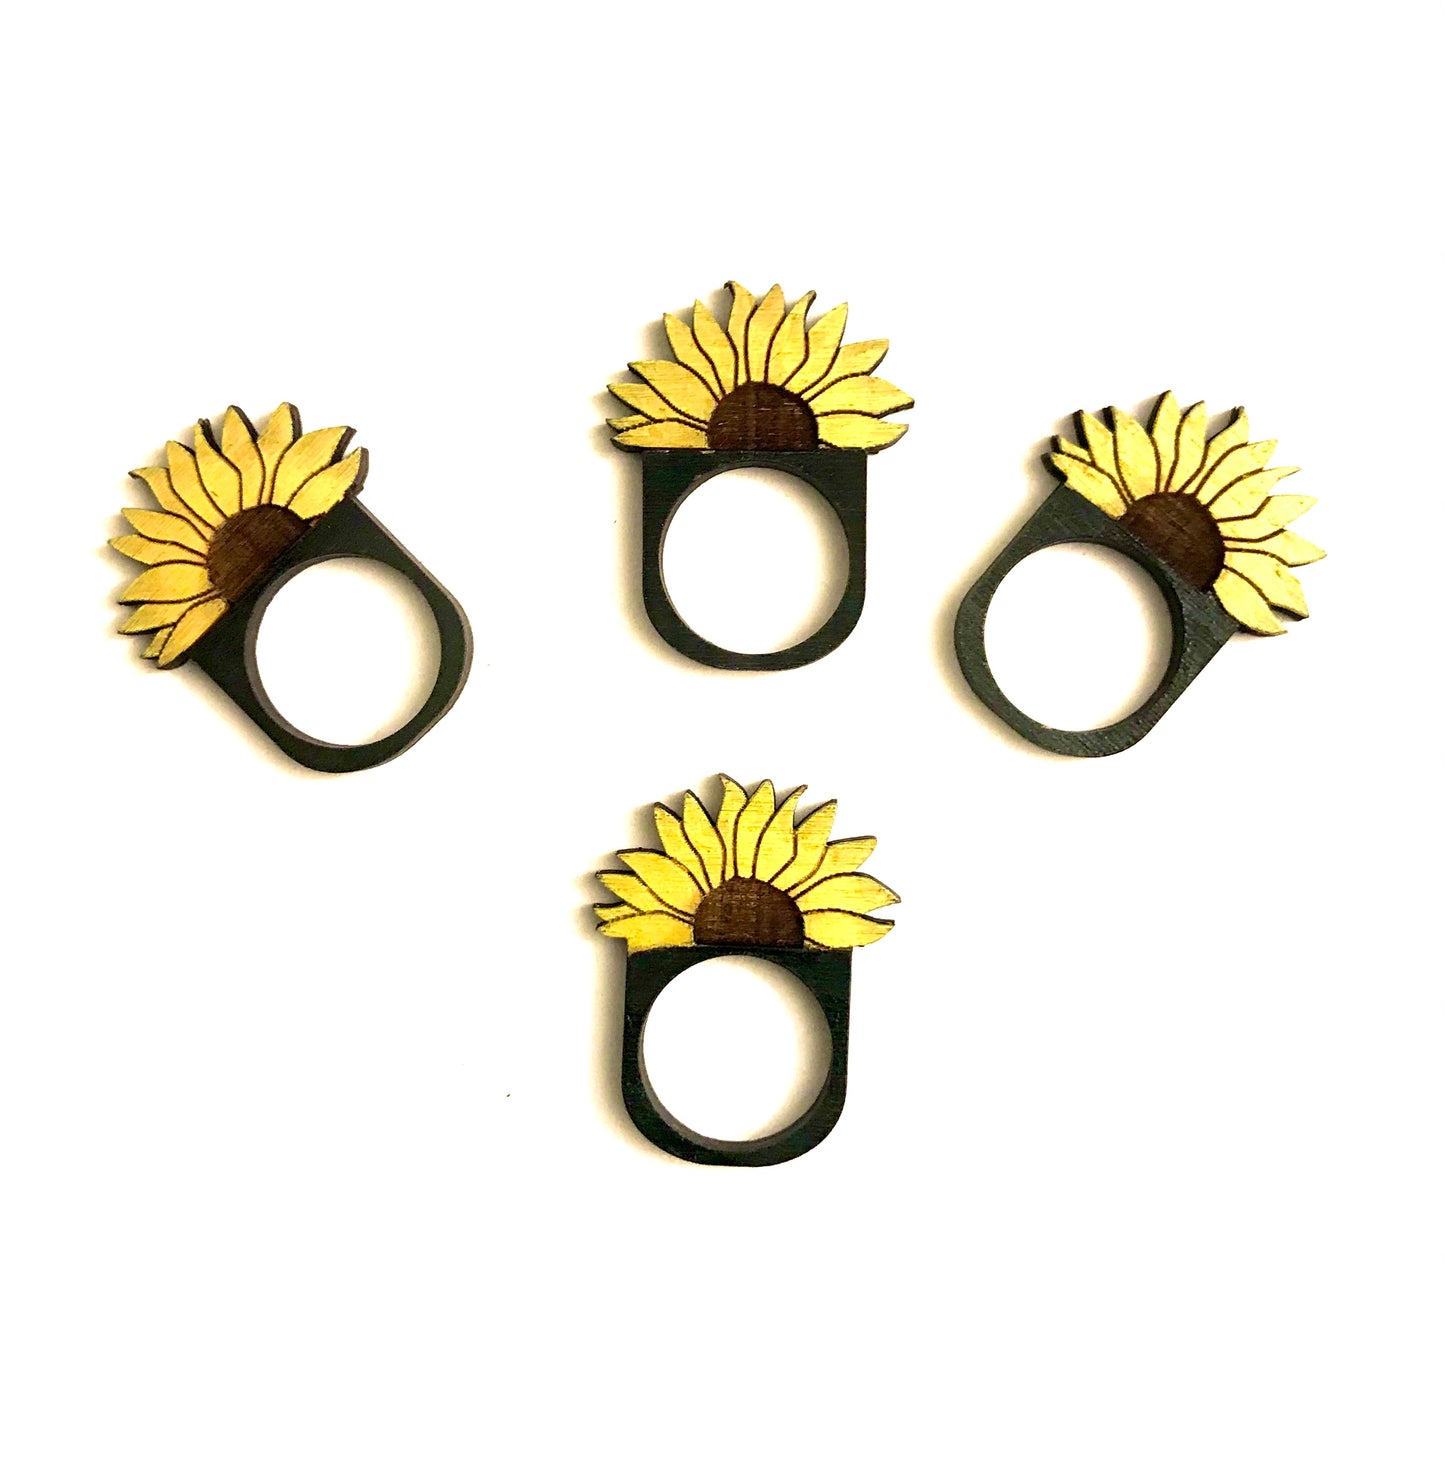 2 Sunflower Stackable Rings